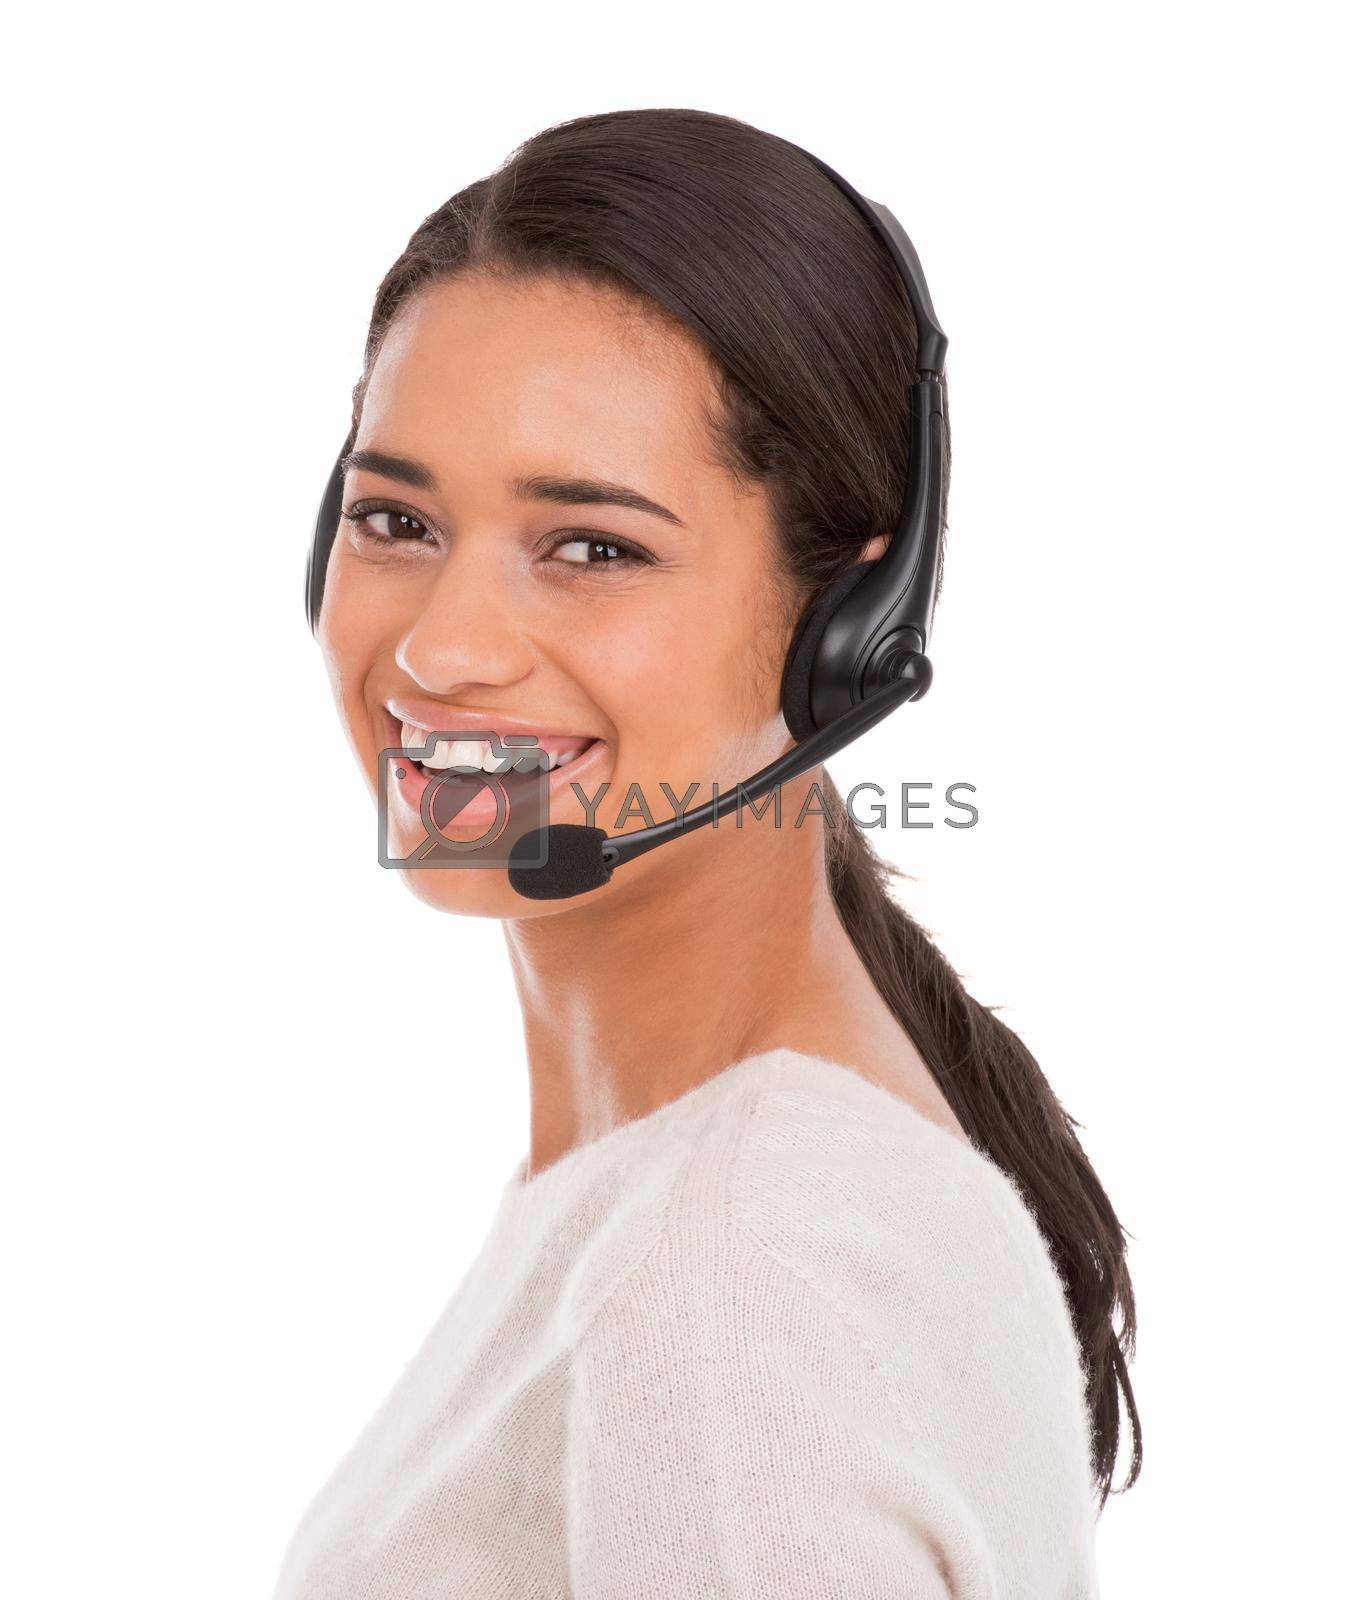 Royalty free image of Ready to take your call. A young female customer service representative wearing a headset. by YuriArcurs